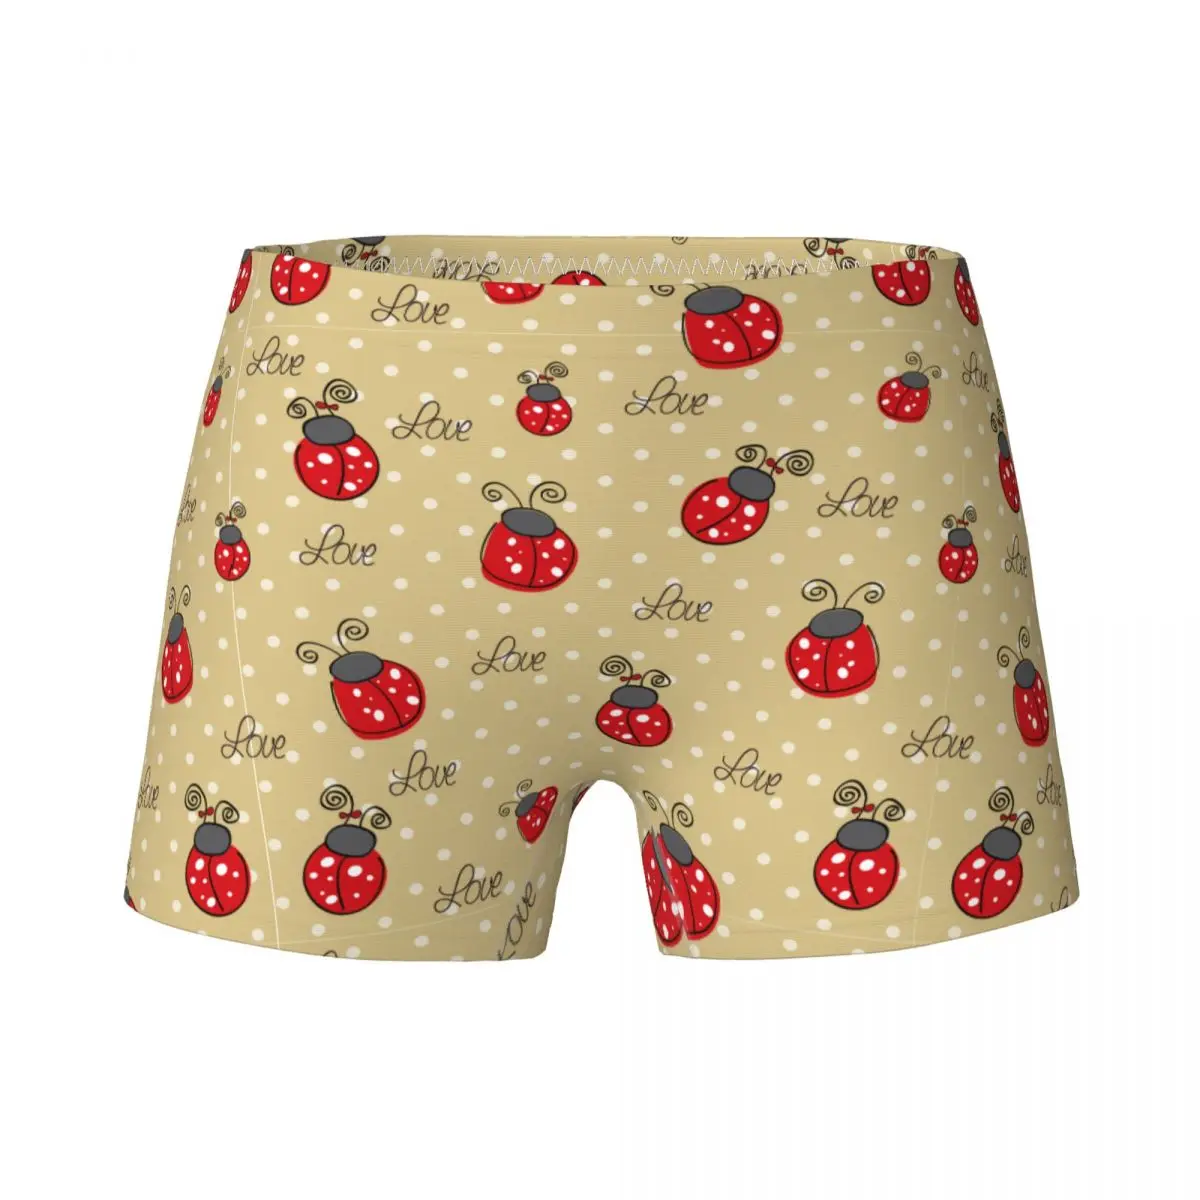 

Girls Ladybug Ladybird Insect Lover Boxer Child Cotton Underwear Kids Teenage Underpants Breathable Briefs Size 4T-15T